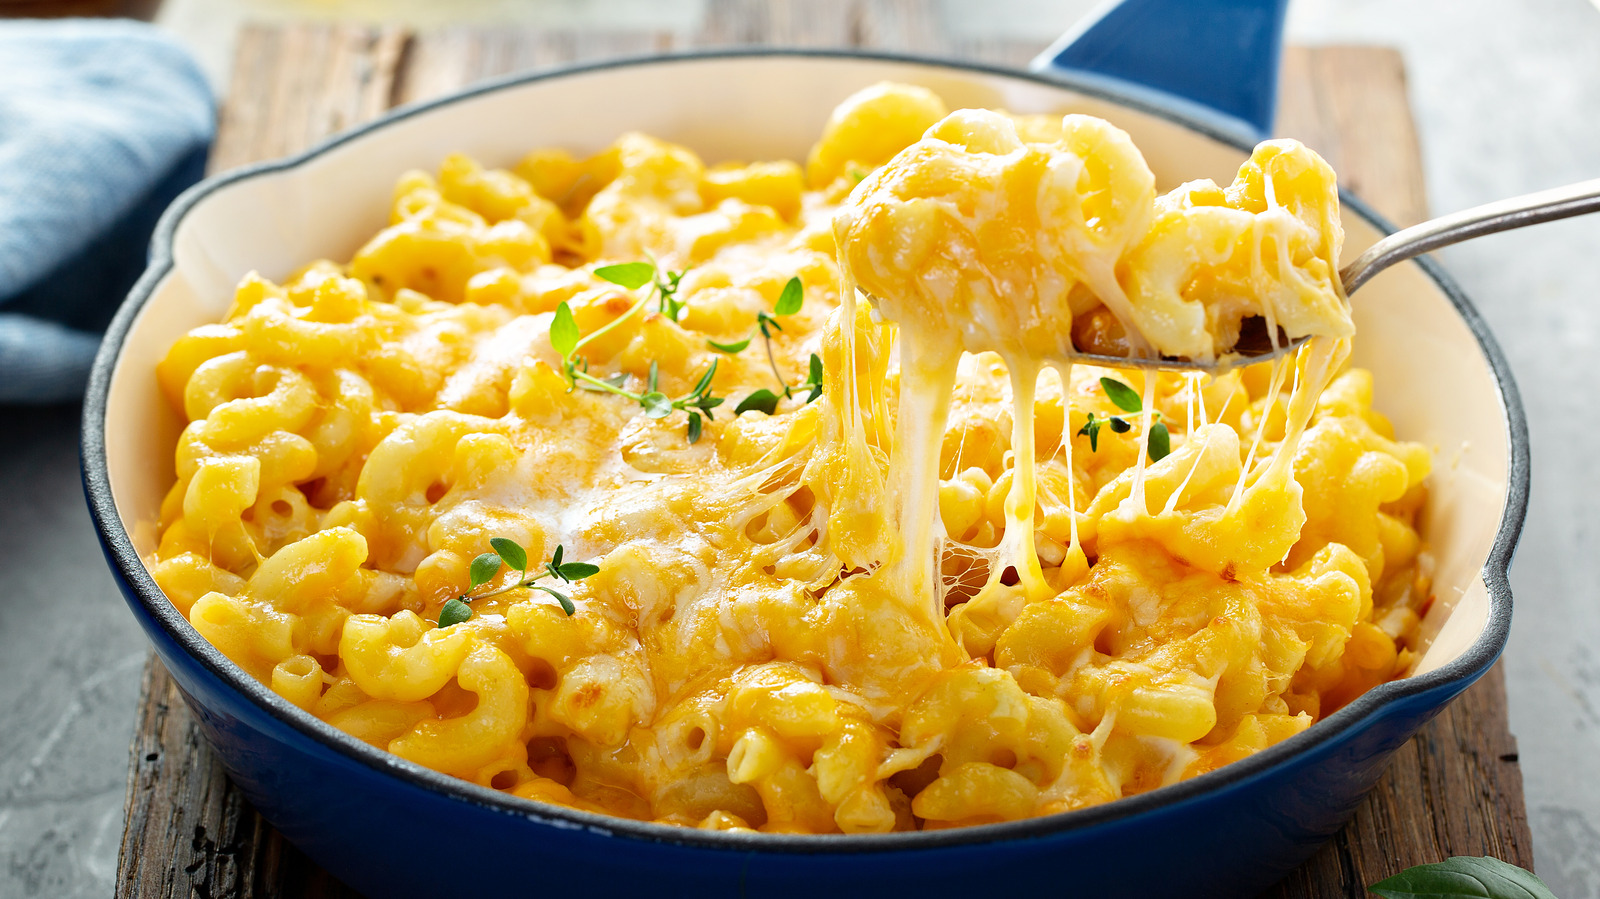 https://www.tastingtable.com/img/gallery/the-15-best-additions-to-mac-and-cheese/l-intro-1670687967.jpg